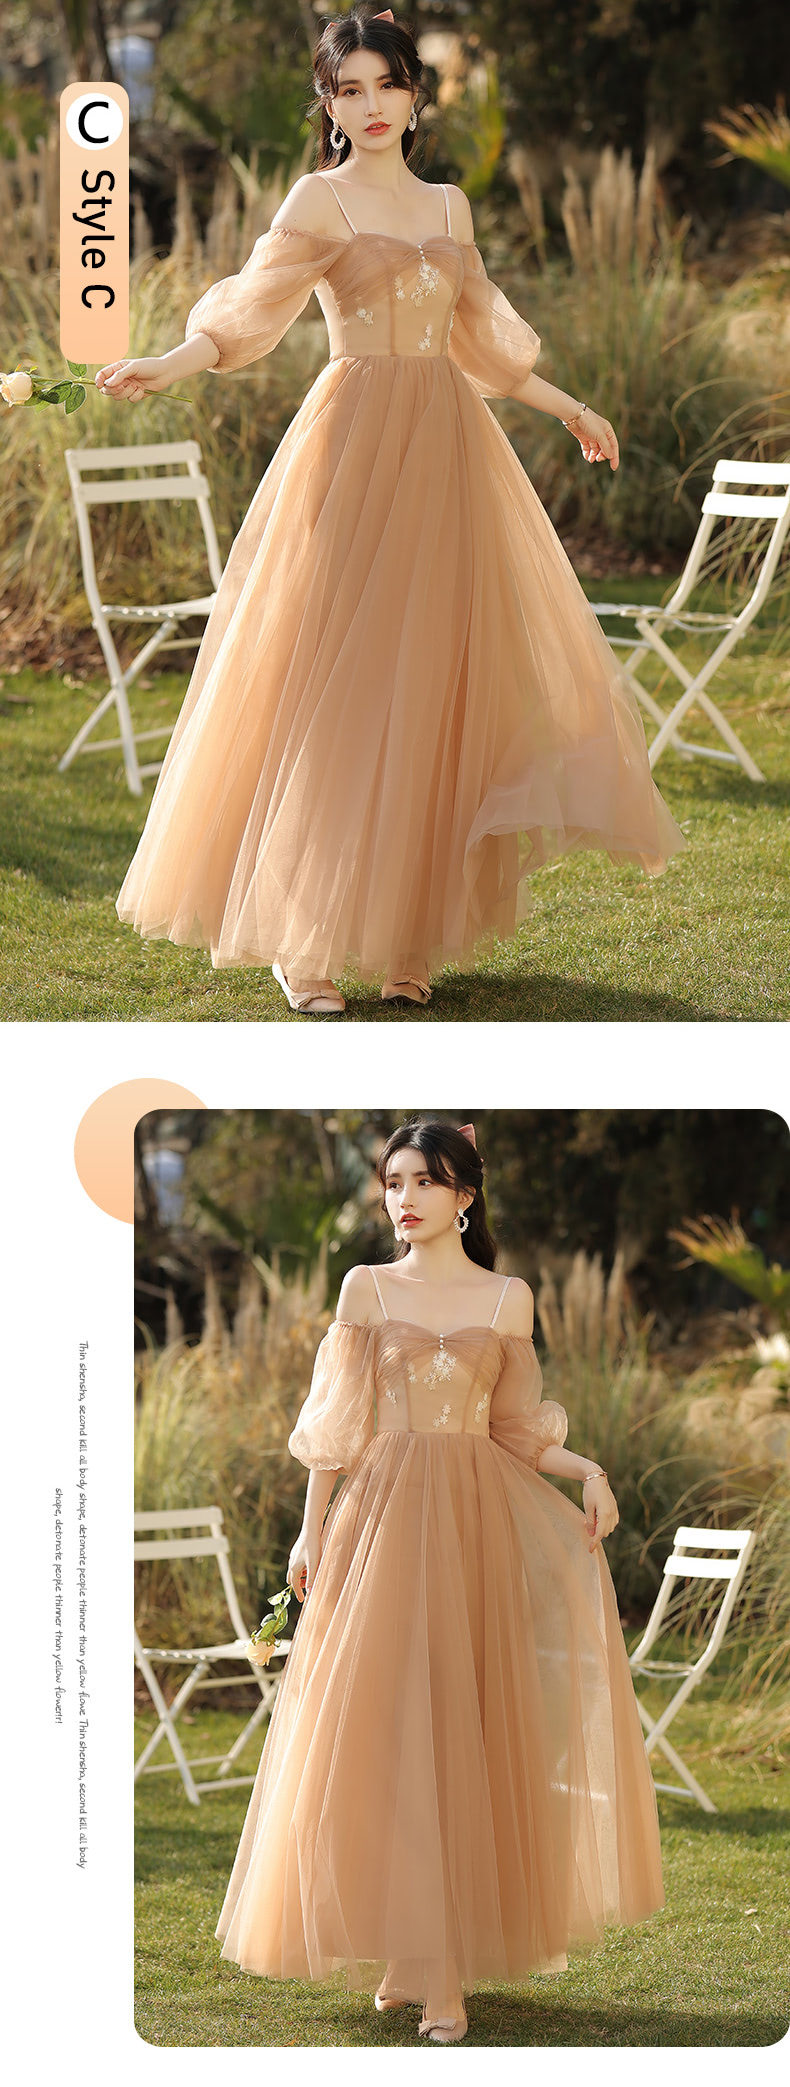 Fairy-Champagne-Bridesmaid-Long-Dress-Sweet-Evening-Formal-Gown18.jpg